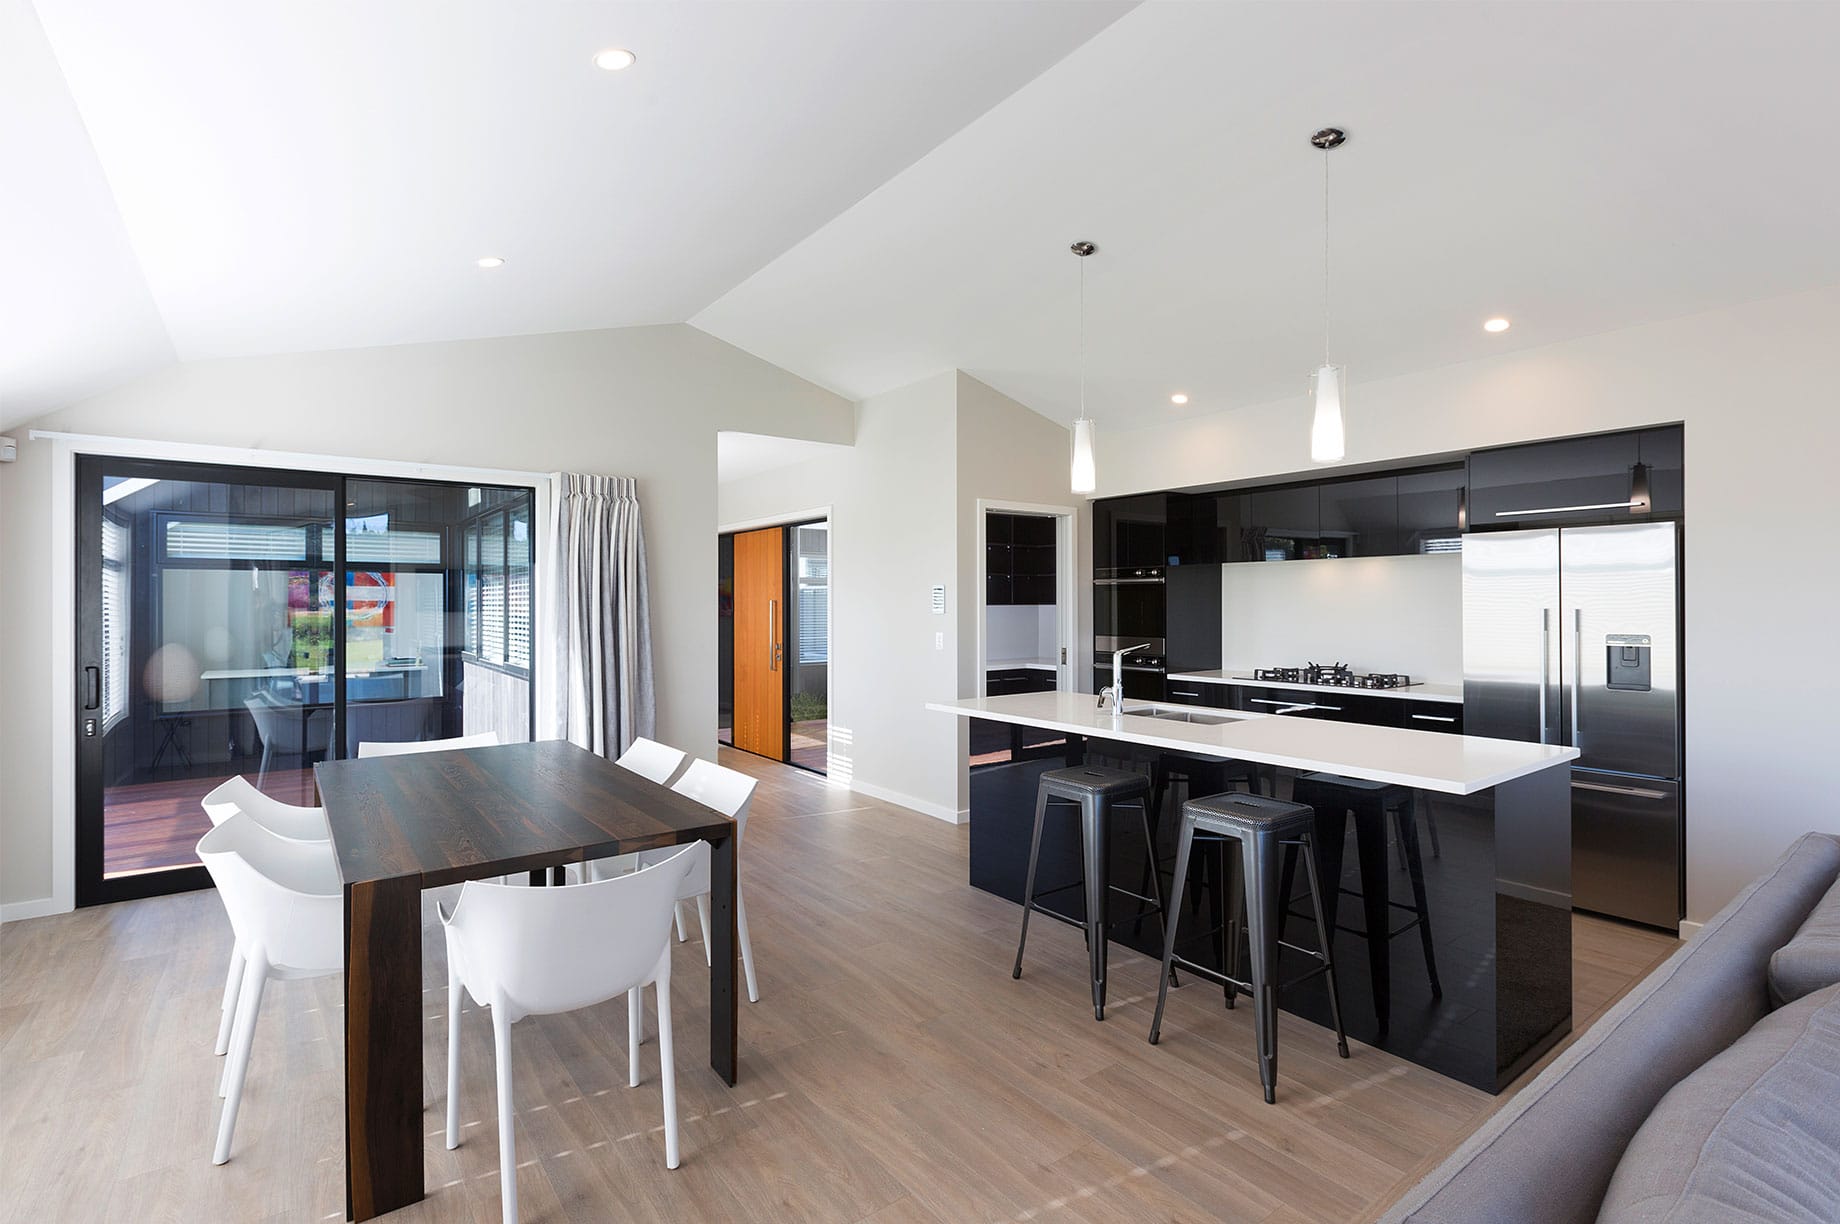 White and black kitchen and dining interior